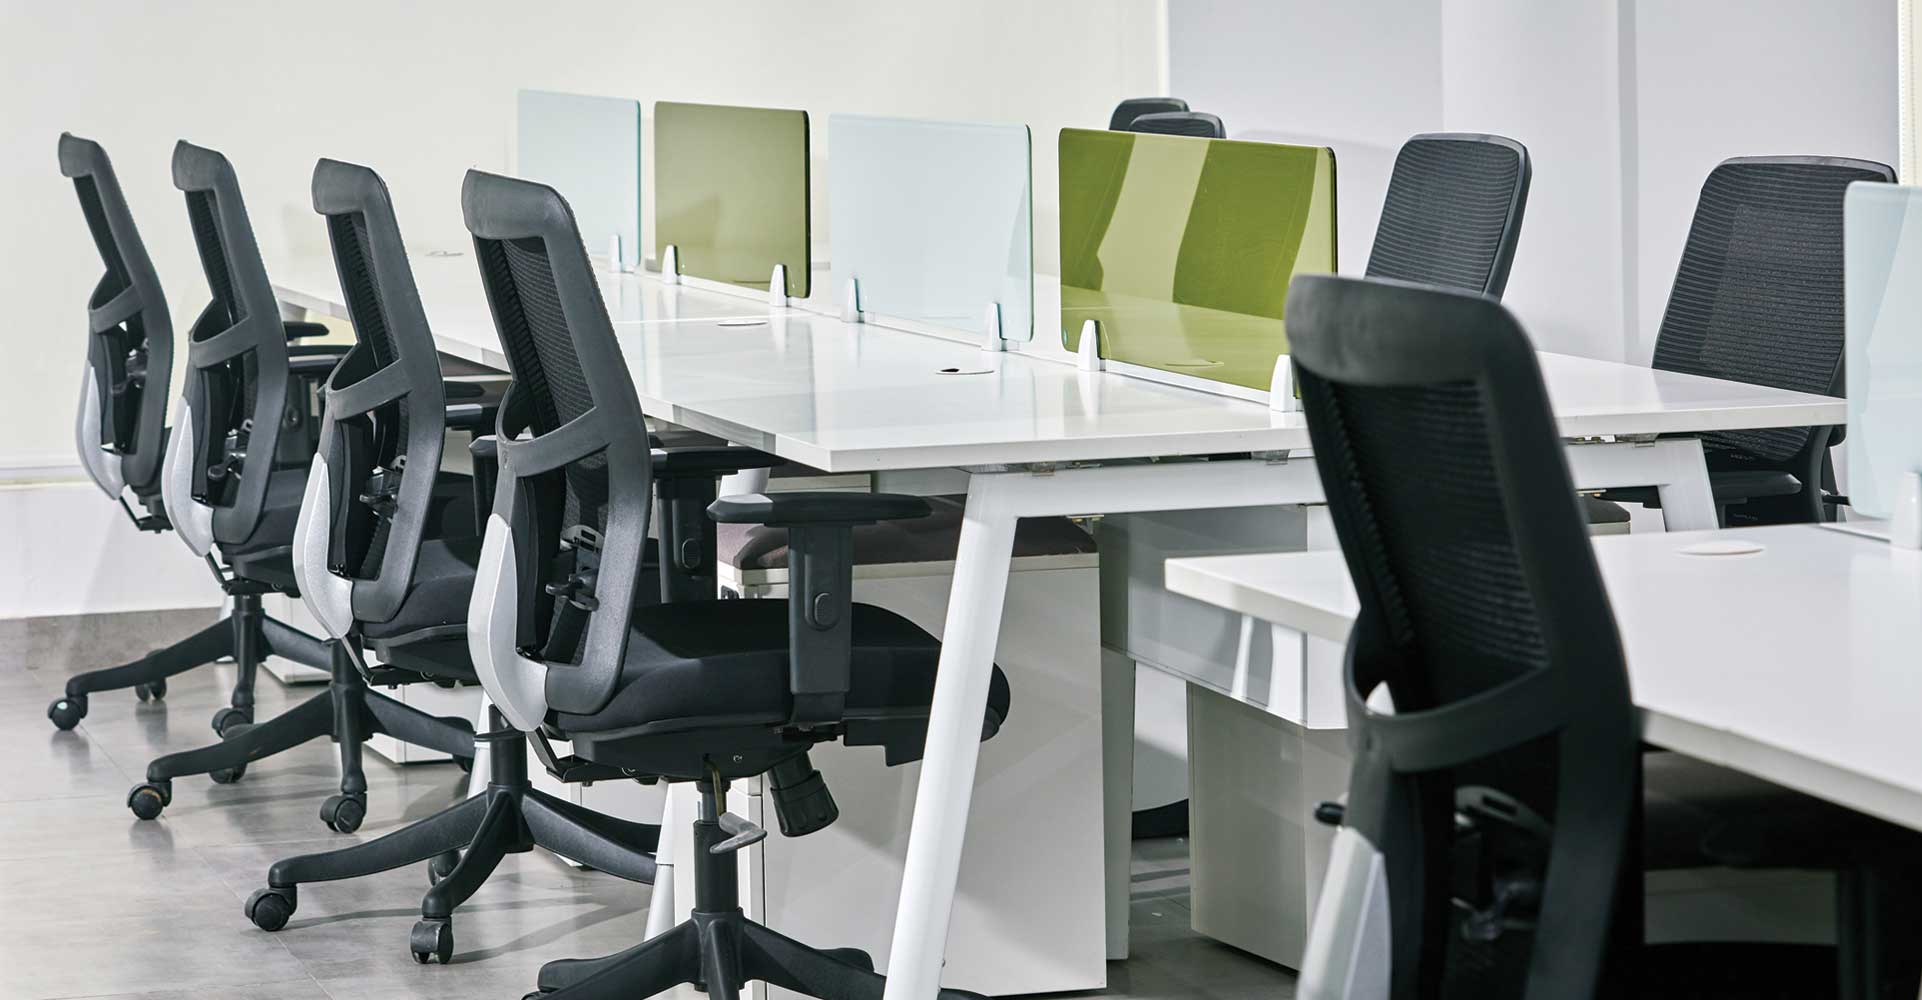 iSit Office Space Solution - Office Furniture, Office Chairs, Modular